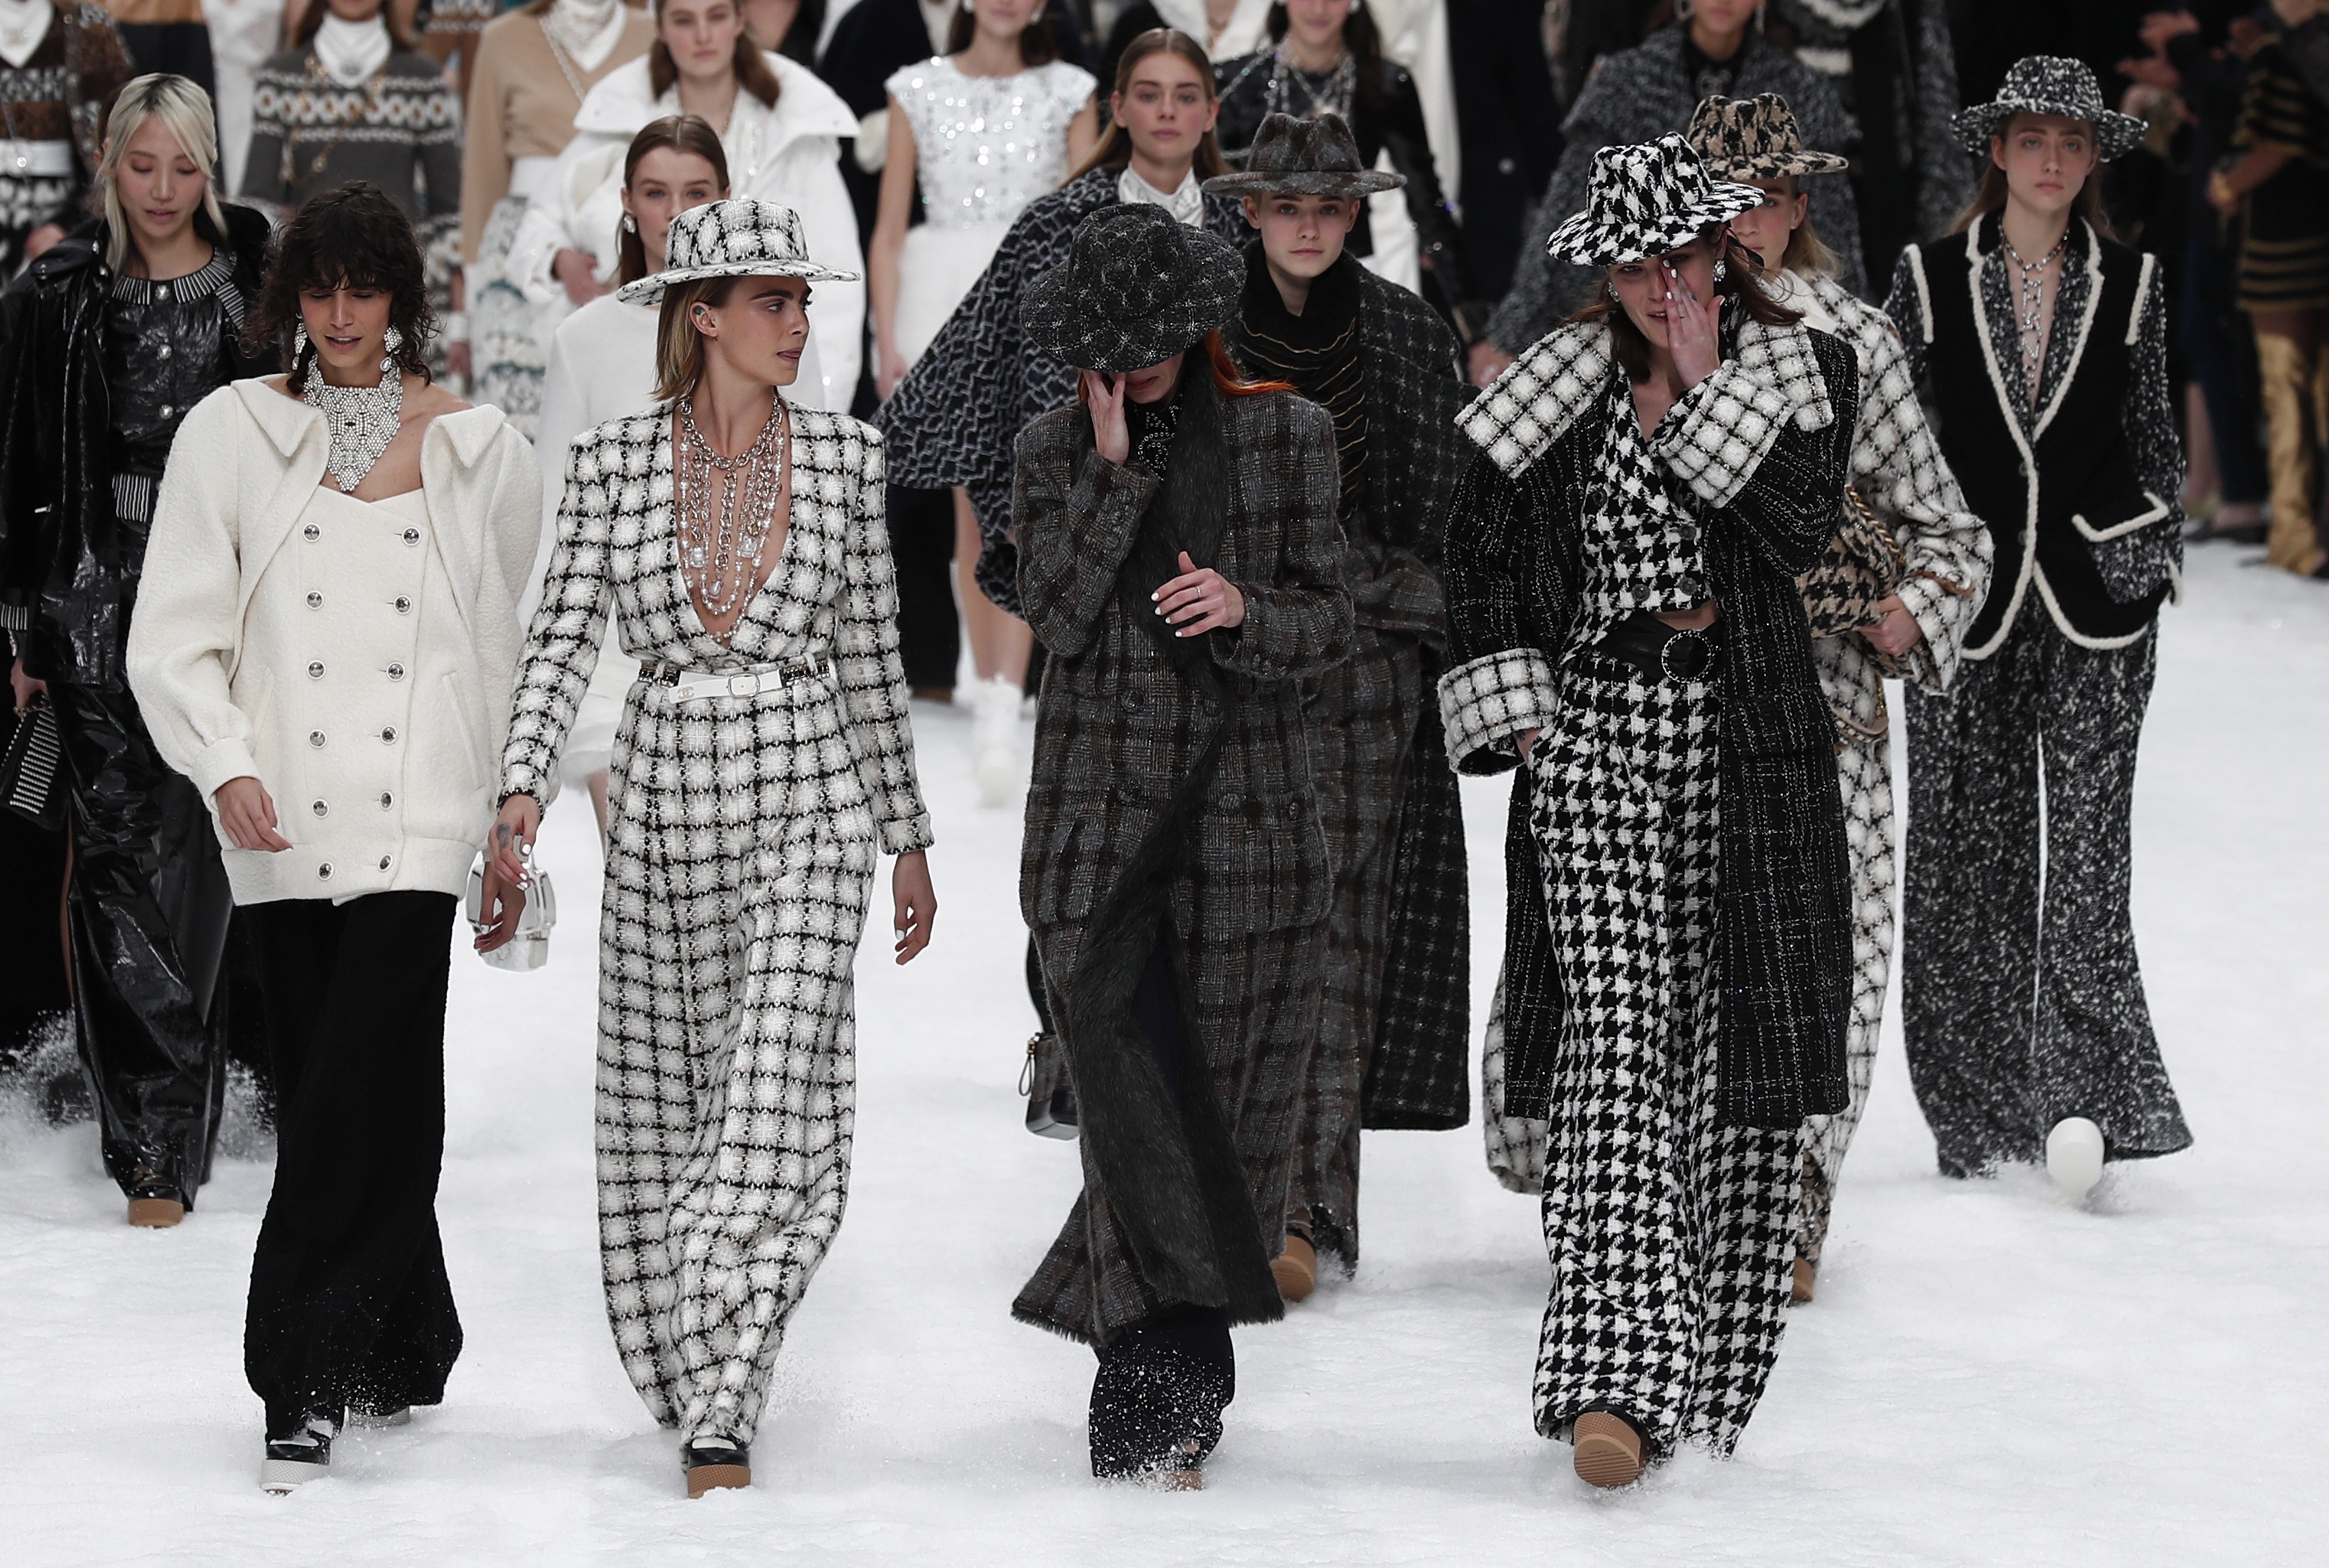 Karl Lagerfeld's last Chanel show was a star-studded, snow-dusted ski  chalet extravaganza